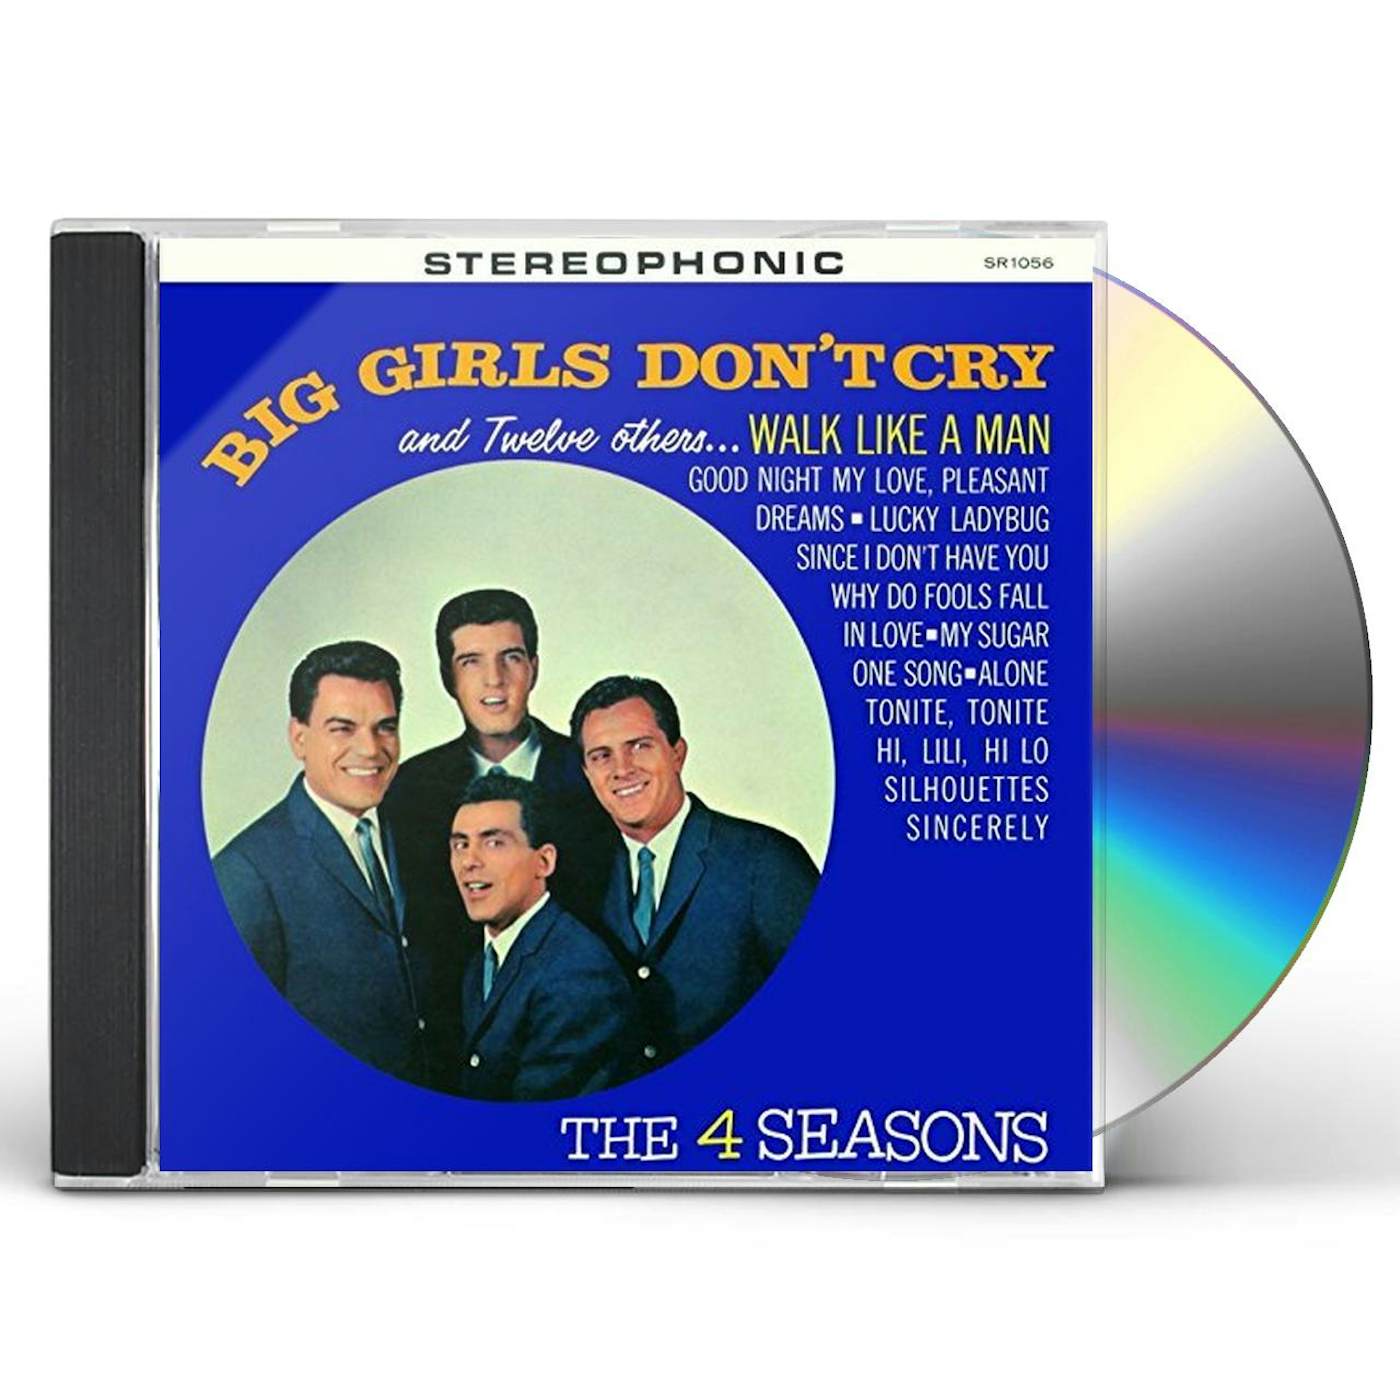 Four Seasons BIG GIRLS DON'T CRY & 12 OTHER HIT CD